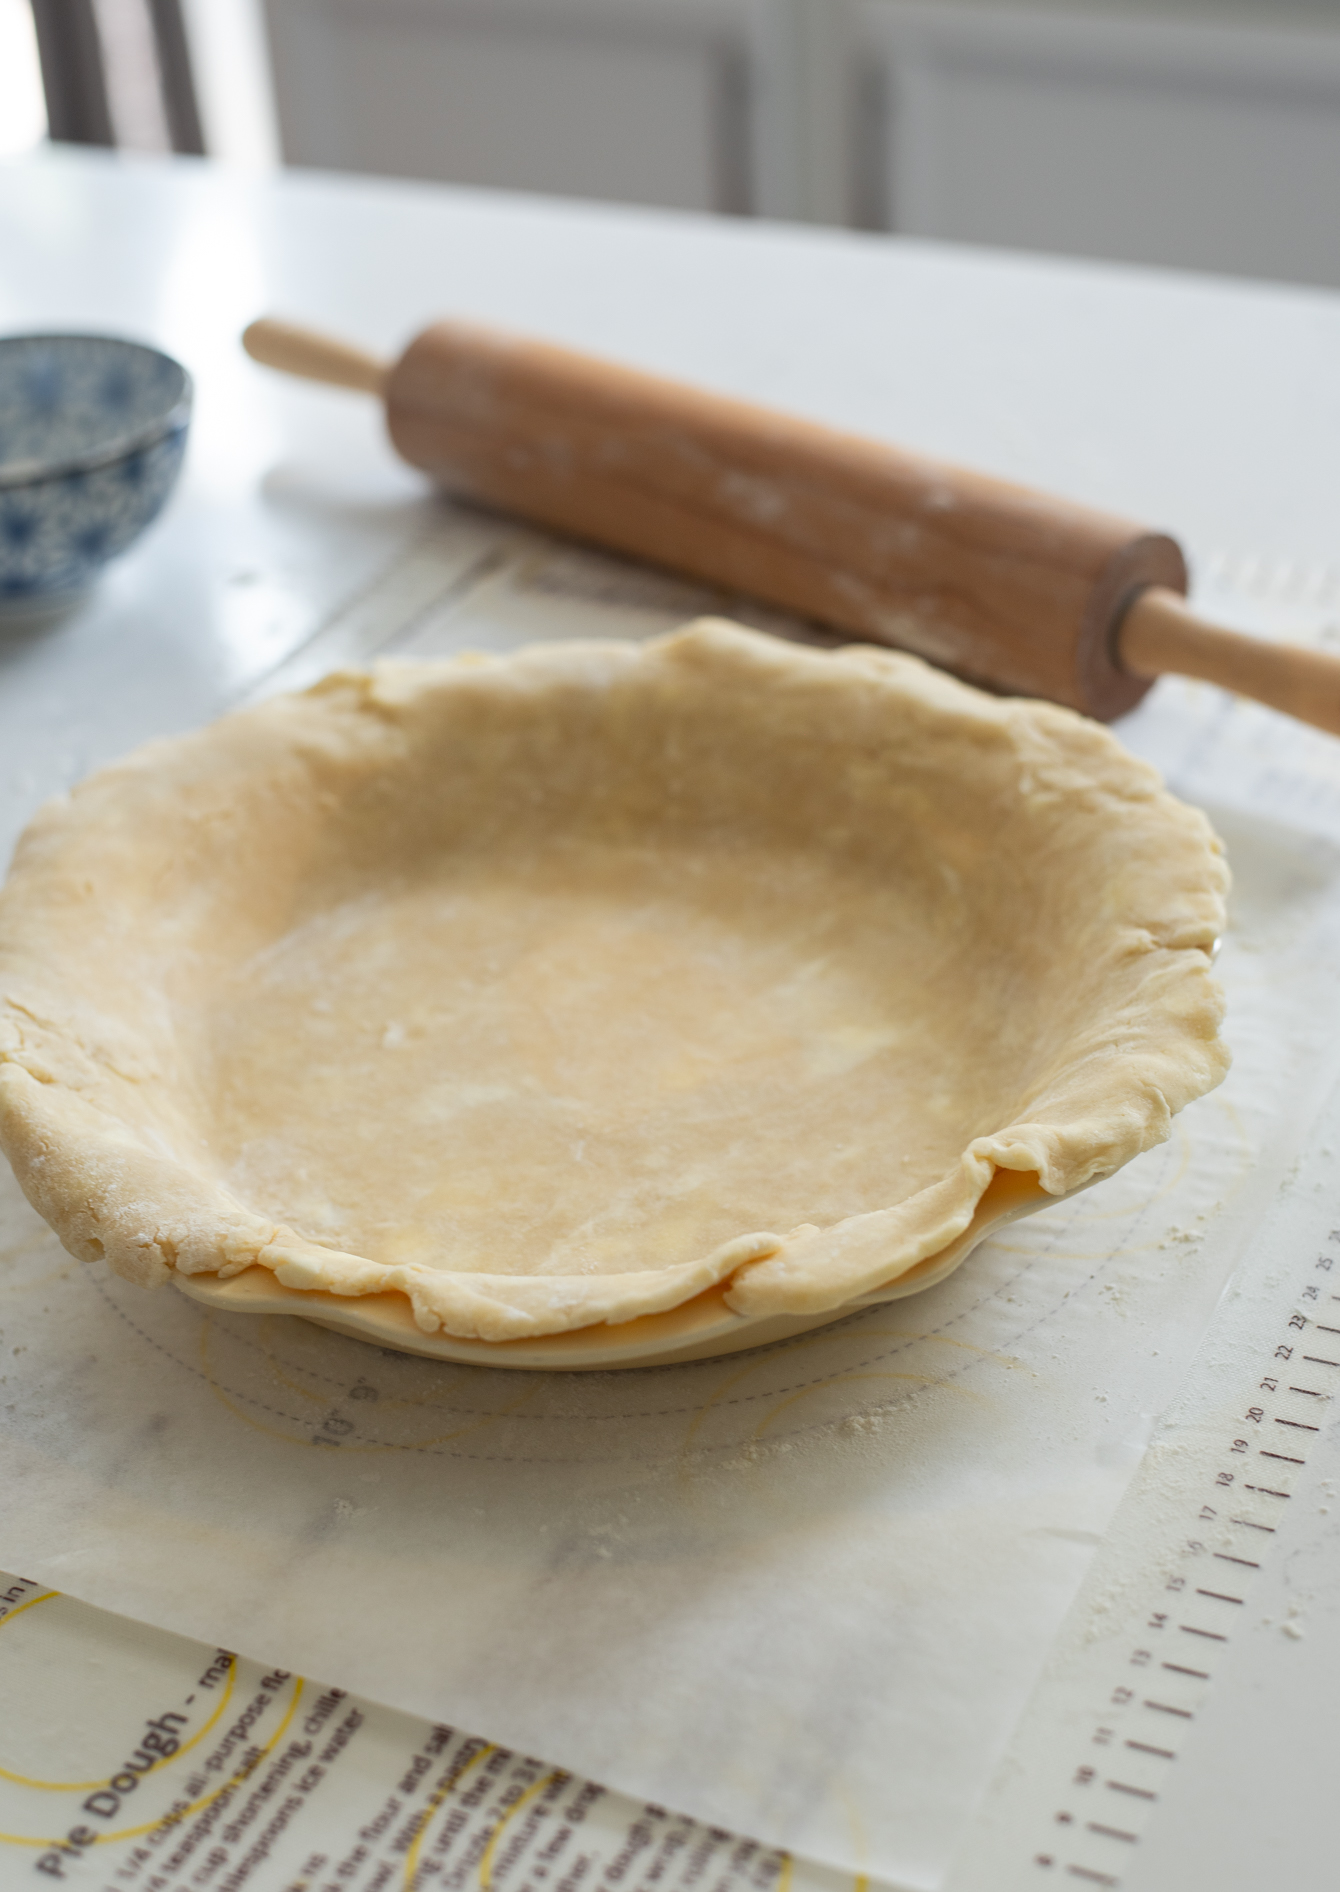 Rolled out pie crust is placed on a pie pan.